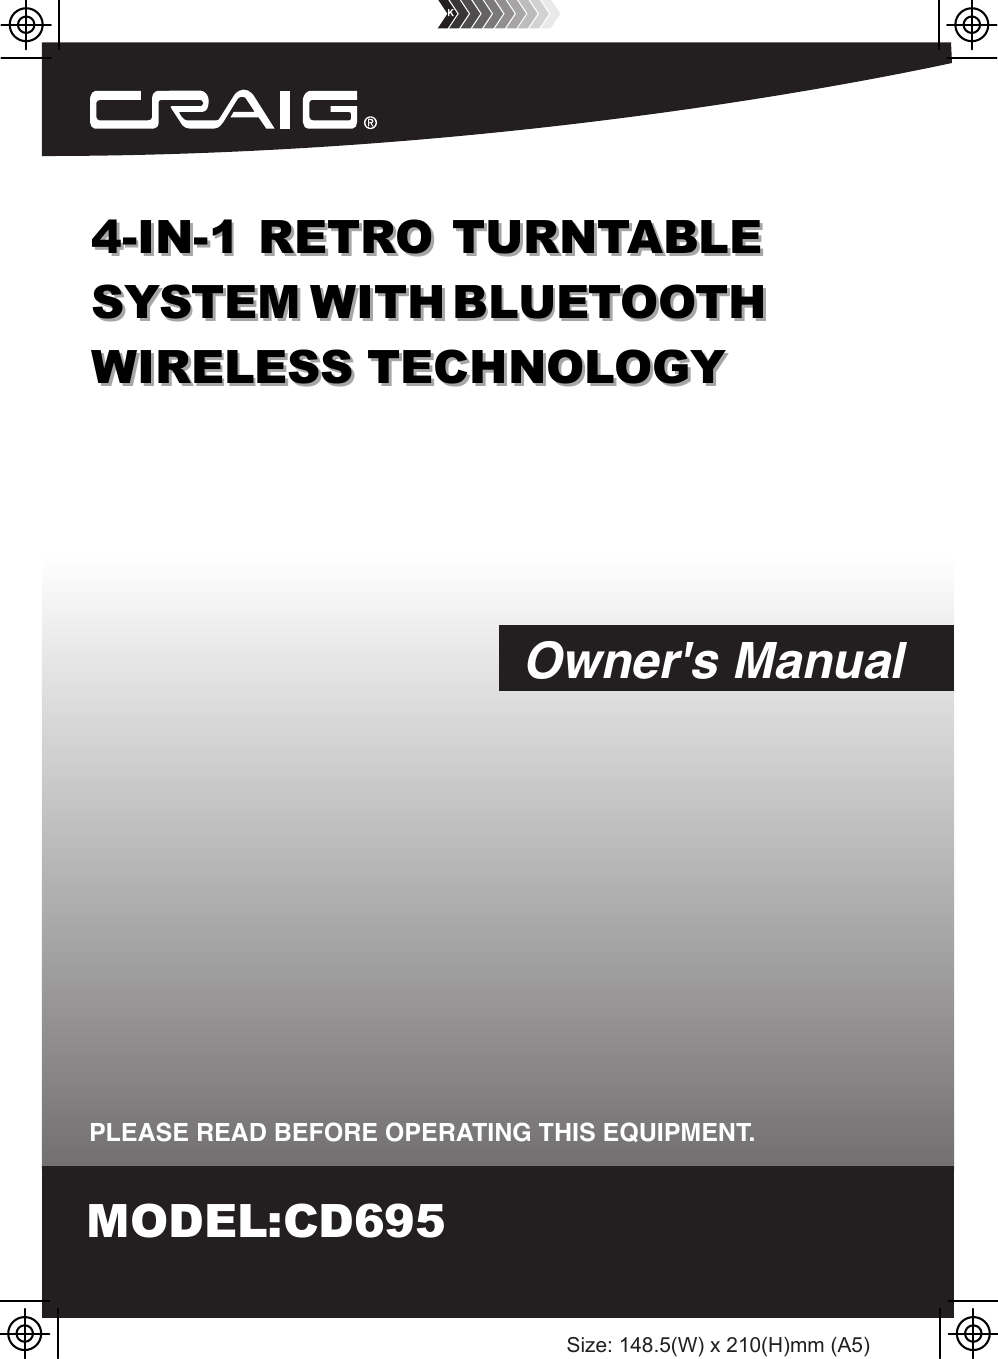 PLEASE READ BEFORE OPERATING THIS EQUIPMENT.Owner&apos;s ManualSize: 148.5(W) x 210(H)mm (A5)4-IN-1 RETRO TURNTABLESYSTEM WITH BLUETOOTHWIRELESS TECHNOLOGY4-IN-1 RETRO TURNTABLESYSTEM WITH BLUETOOTHWIRELESS TECHNOLOGYMODEL:CD695